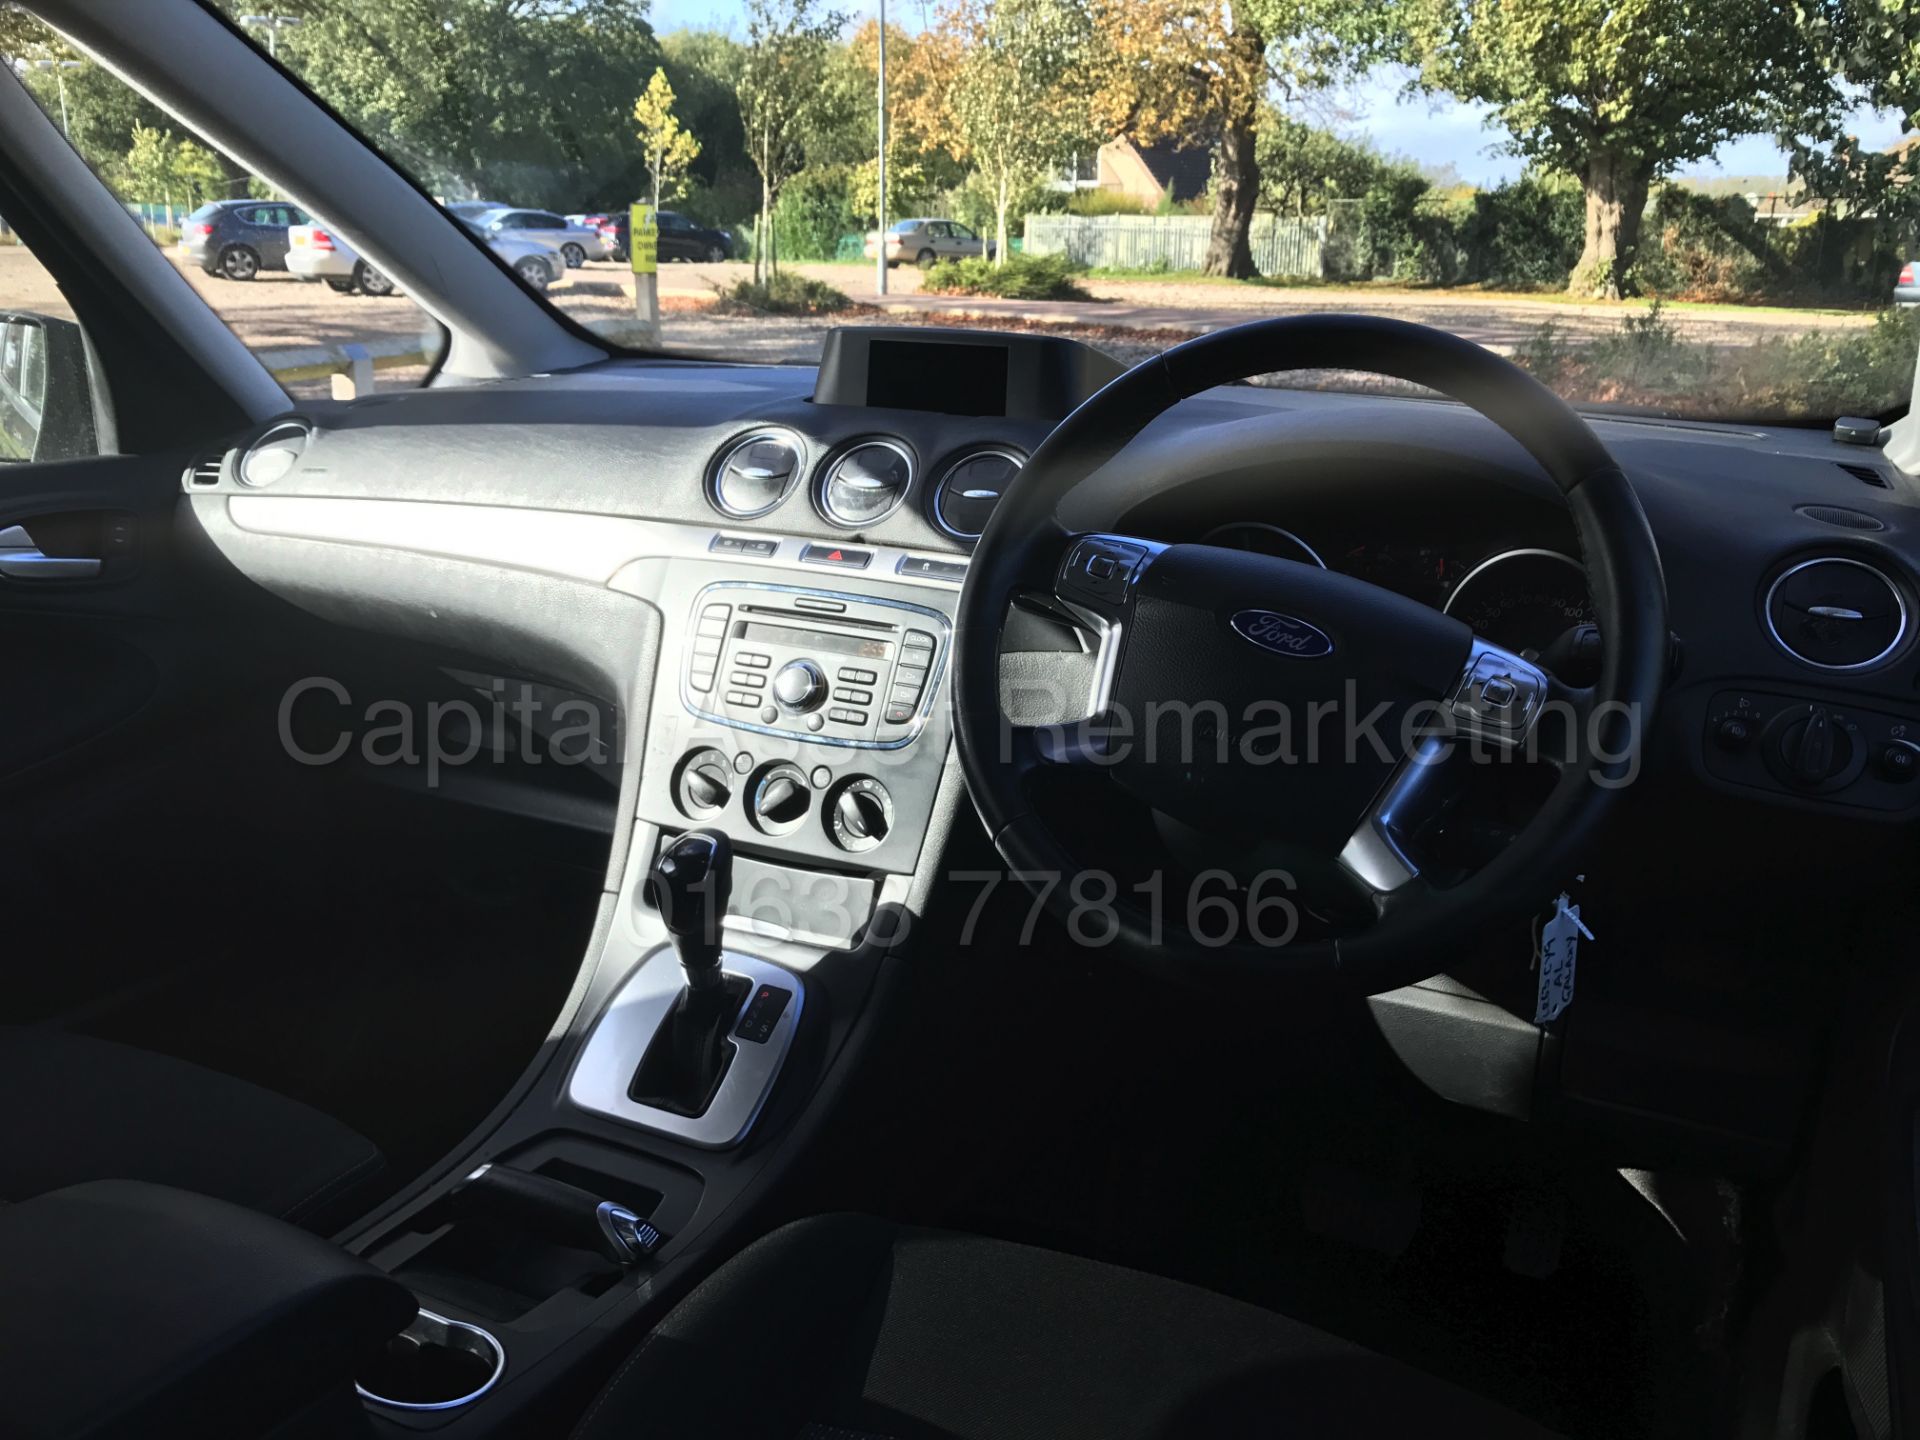 (ON SALE) FORD GALAXY 'ZETEC' 7 SEATER MPV (2014 MODEL) '2.0 TDCI -140 BHP' (1 OWNER) *FULL HISTORY* - Image 20 of 28